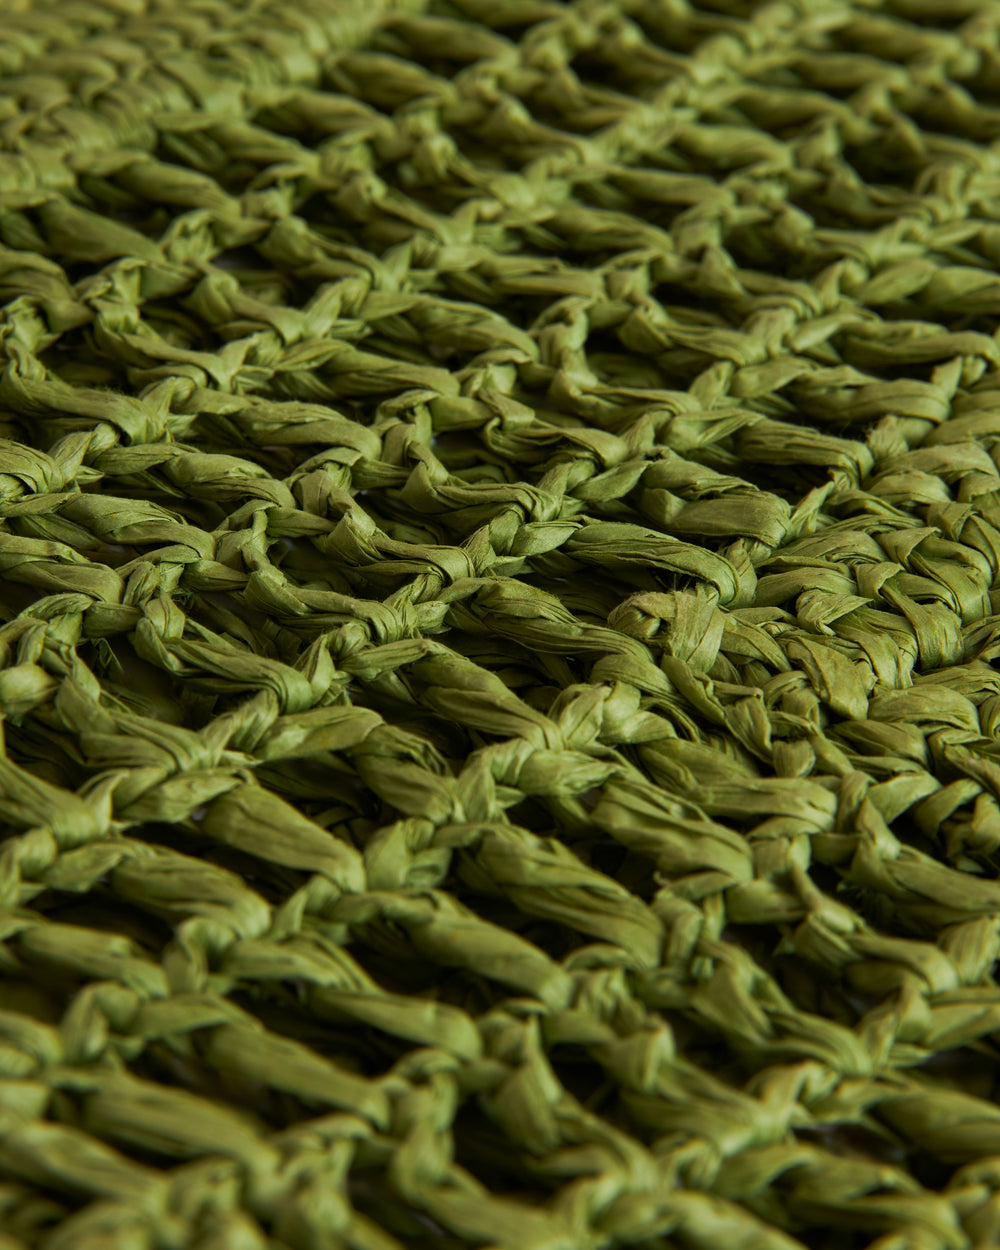 Close-up view of a woven green fabric texture showing intricate embroidered Dandy Del Mar logo patterns on The Amabile Raffia Bag - Kaffir.